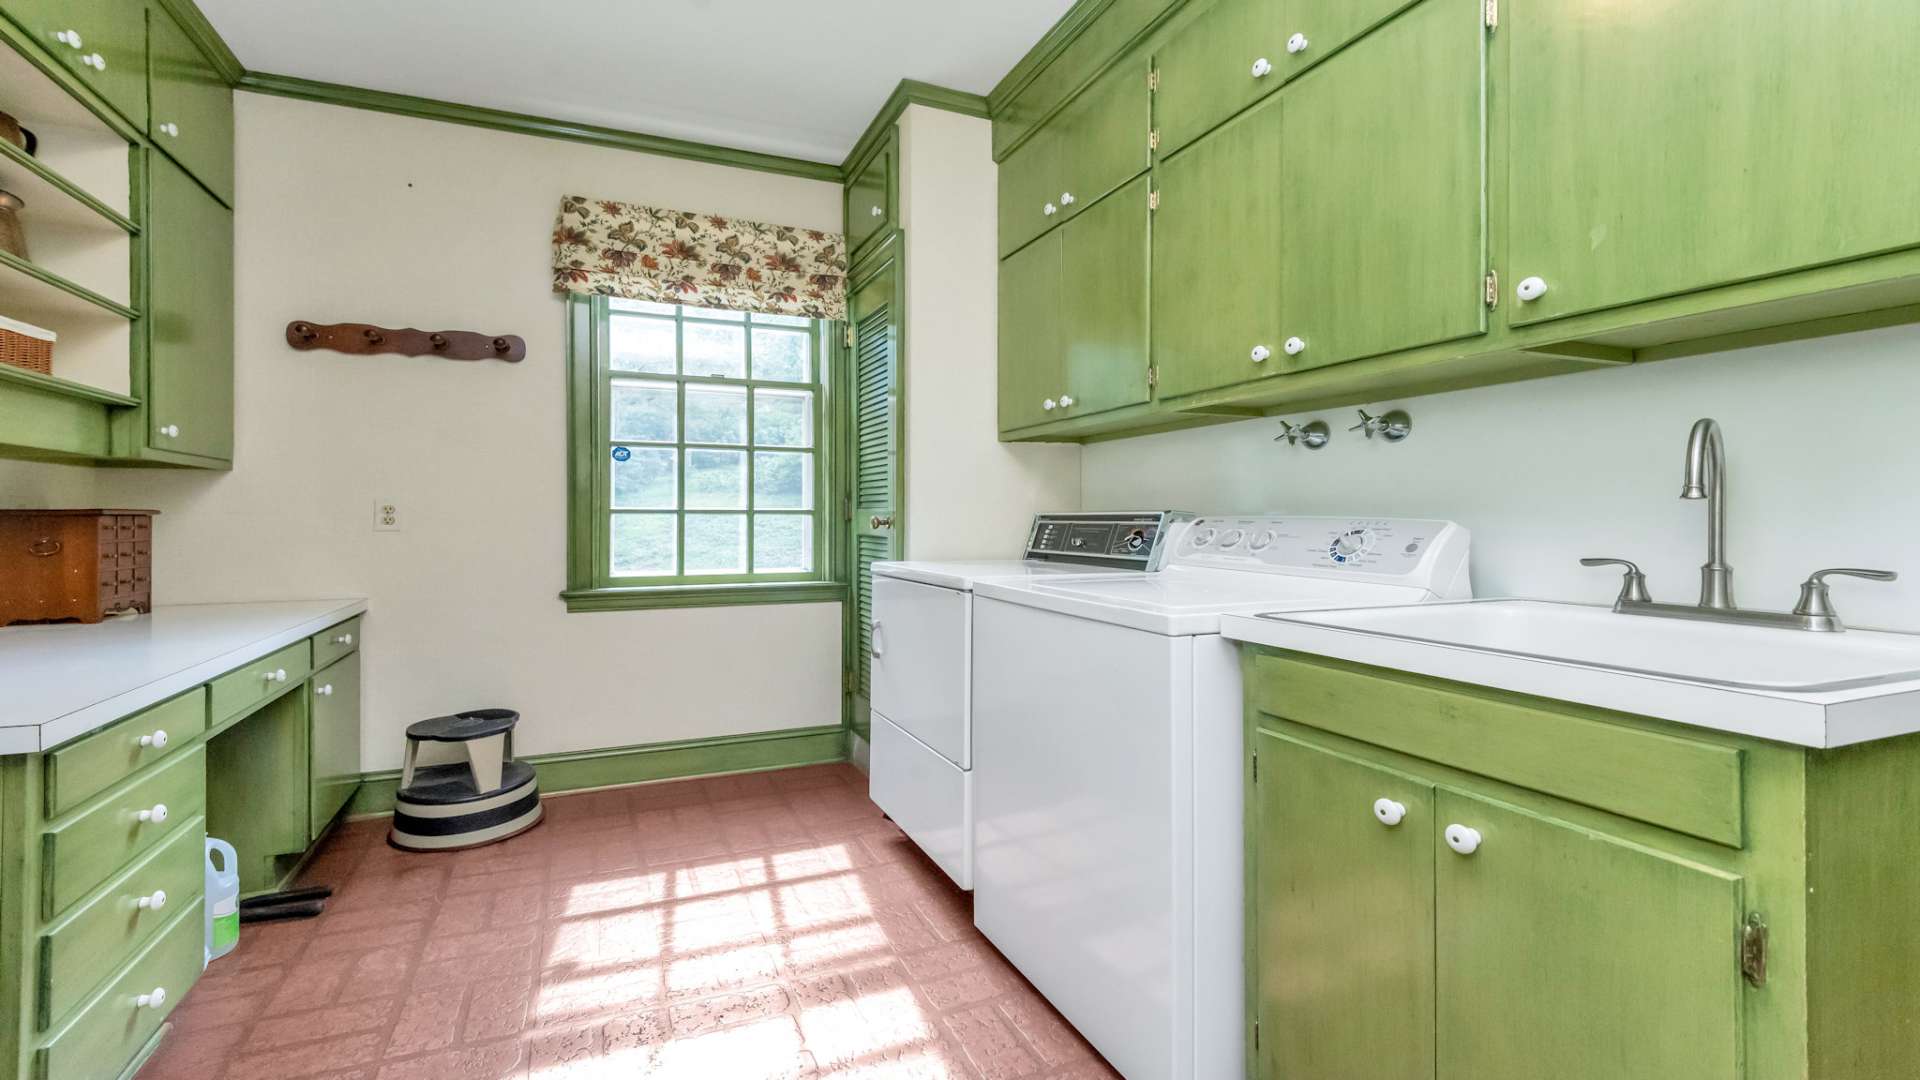 Accessed from the kitchen or the outdoors, the laundry room is spacious and features lots of built-ins for storage, a laundry sink, a sewing desk, and a "dry" drain for those items that need to drip dry. One of the three half baths is conveniently located in this area.